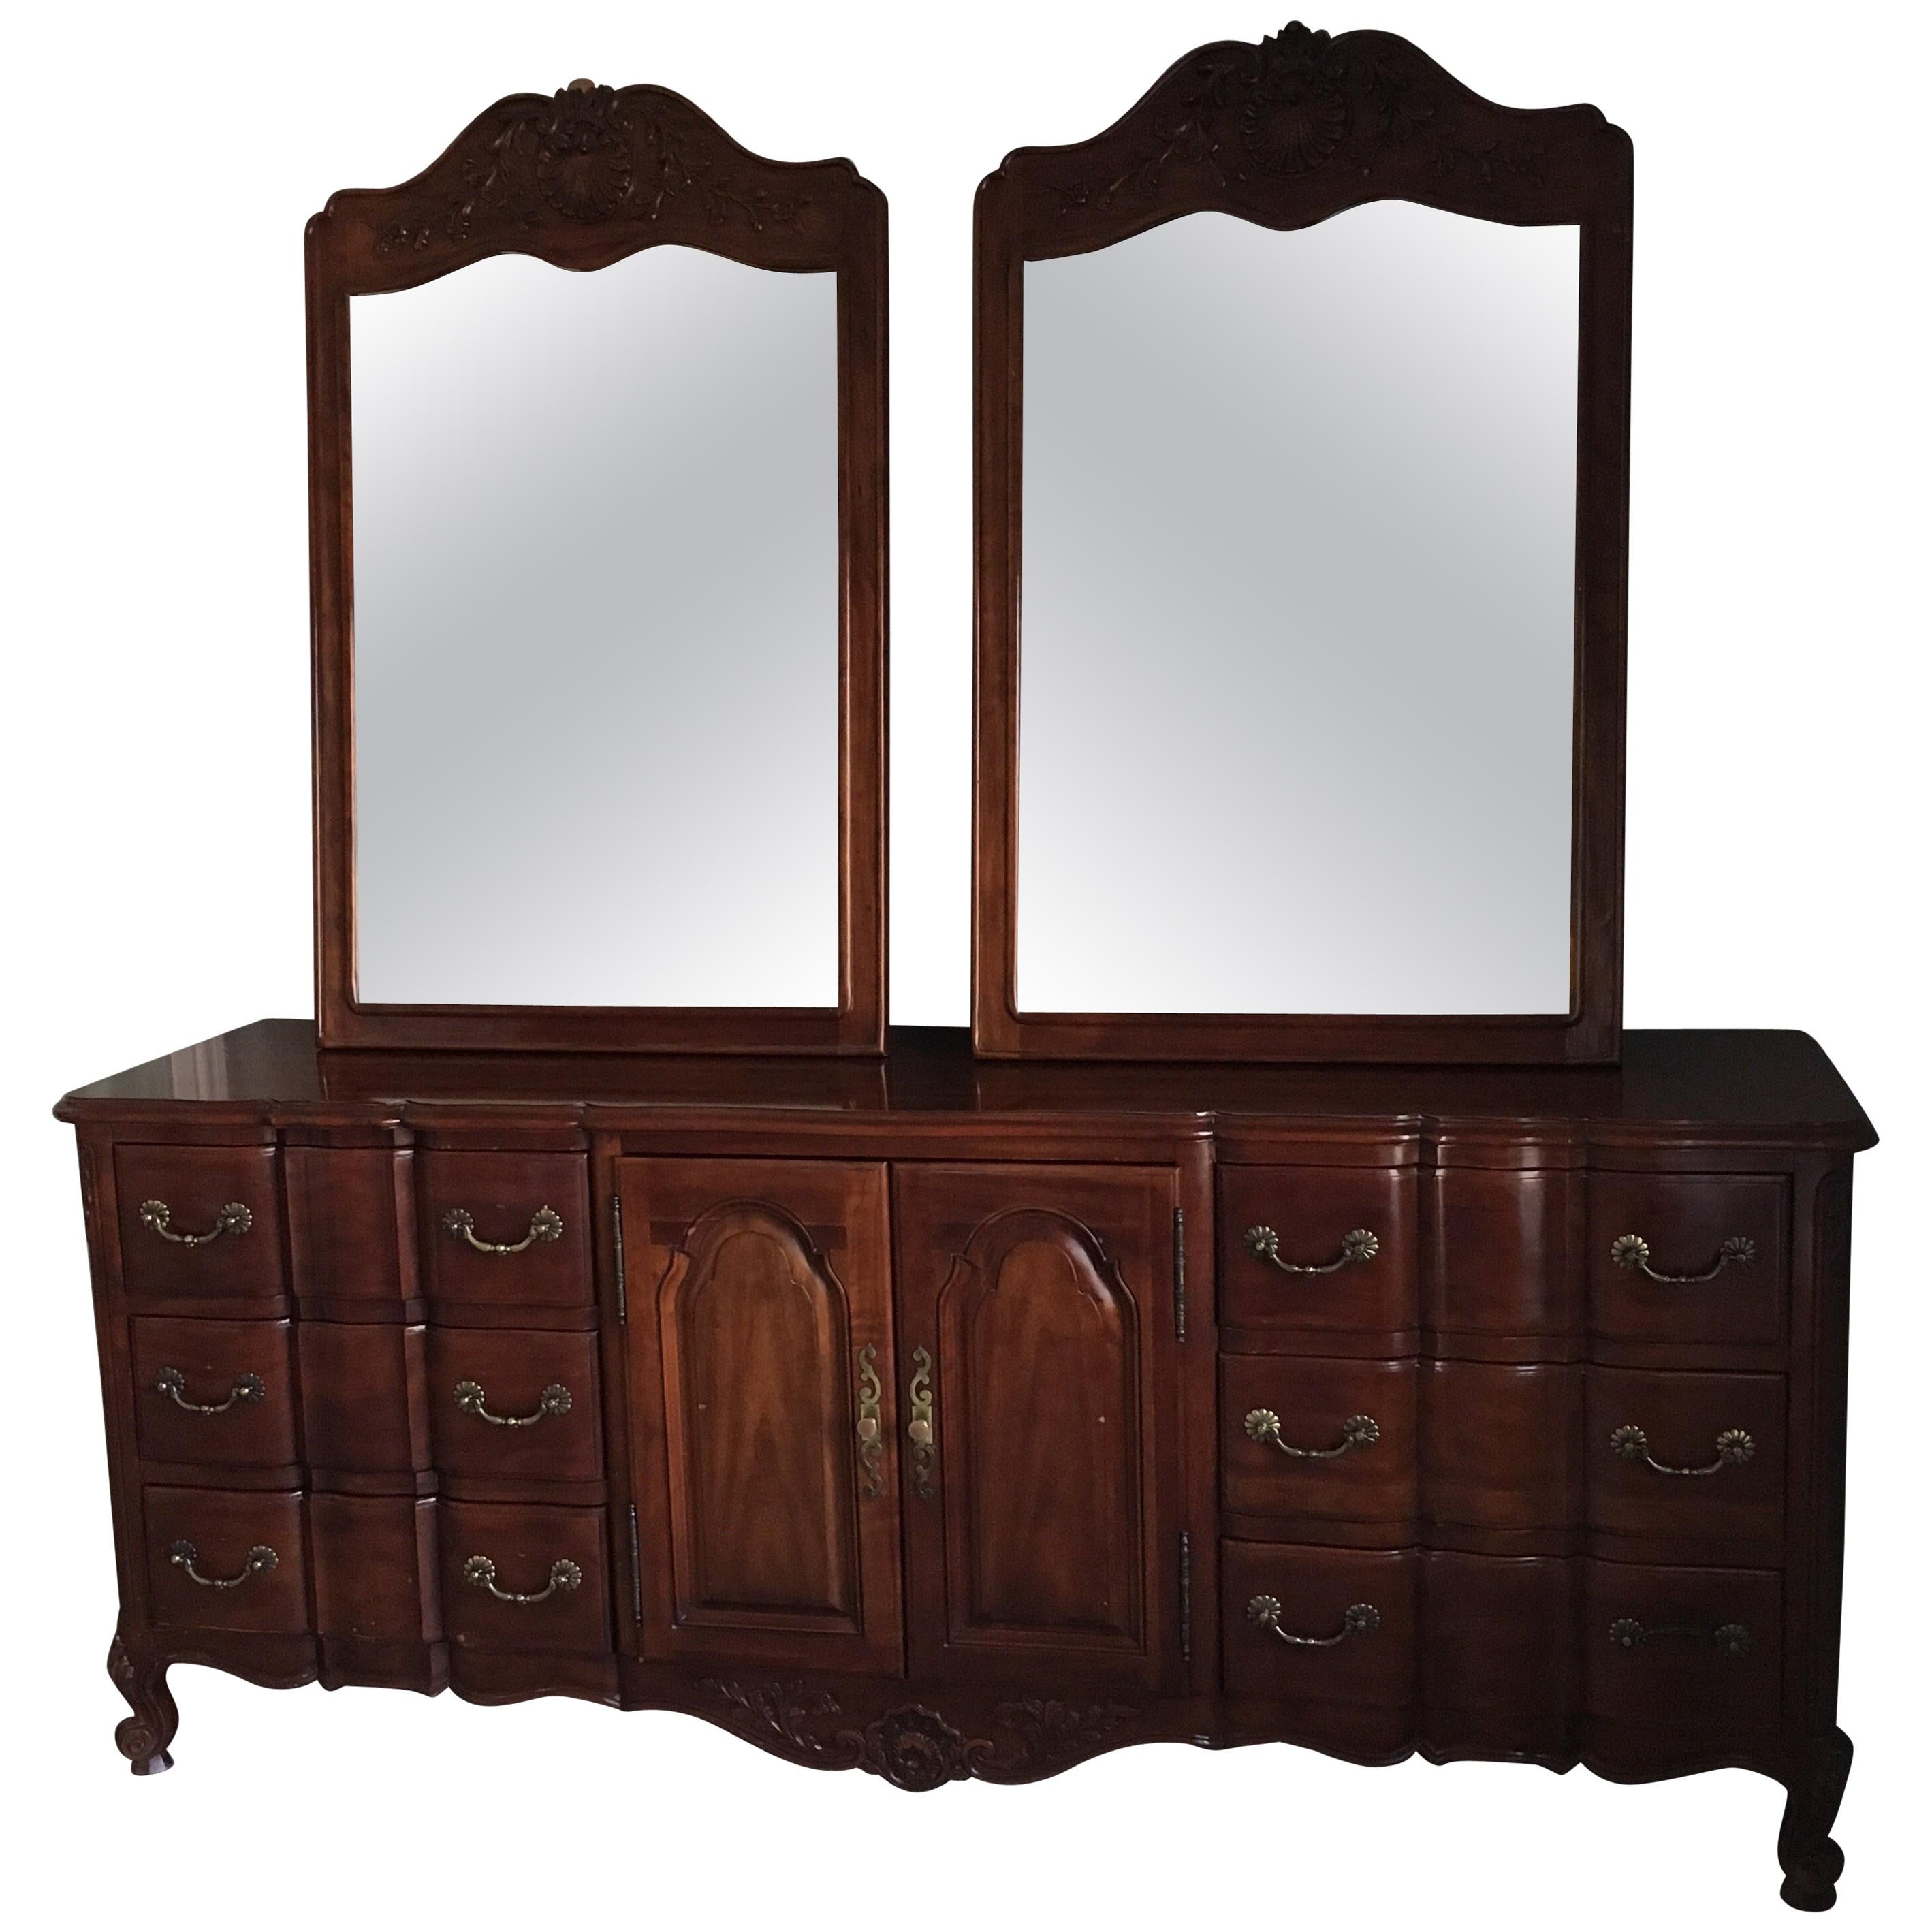 20th Century Provincial Style Double Dresser and Pair of Mirrors by Widdicomb For Sale